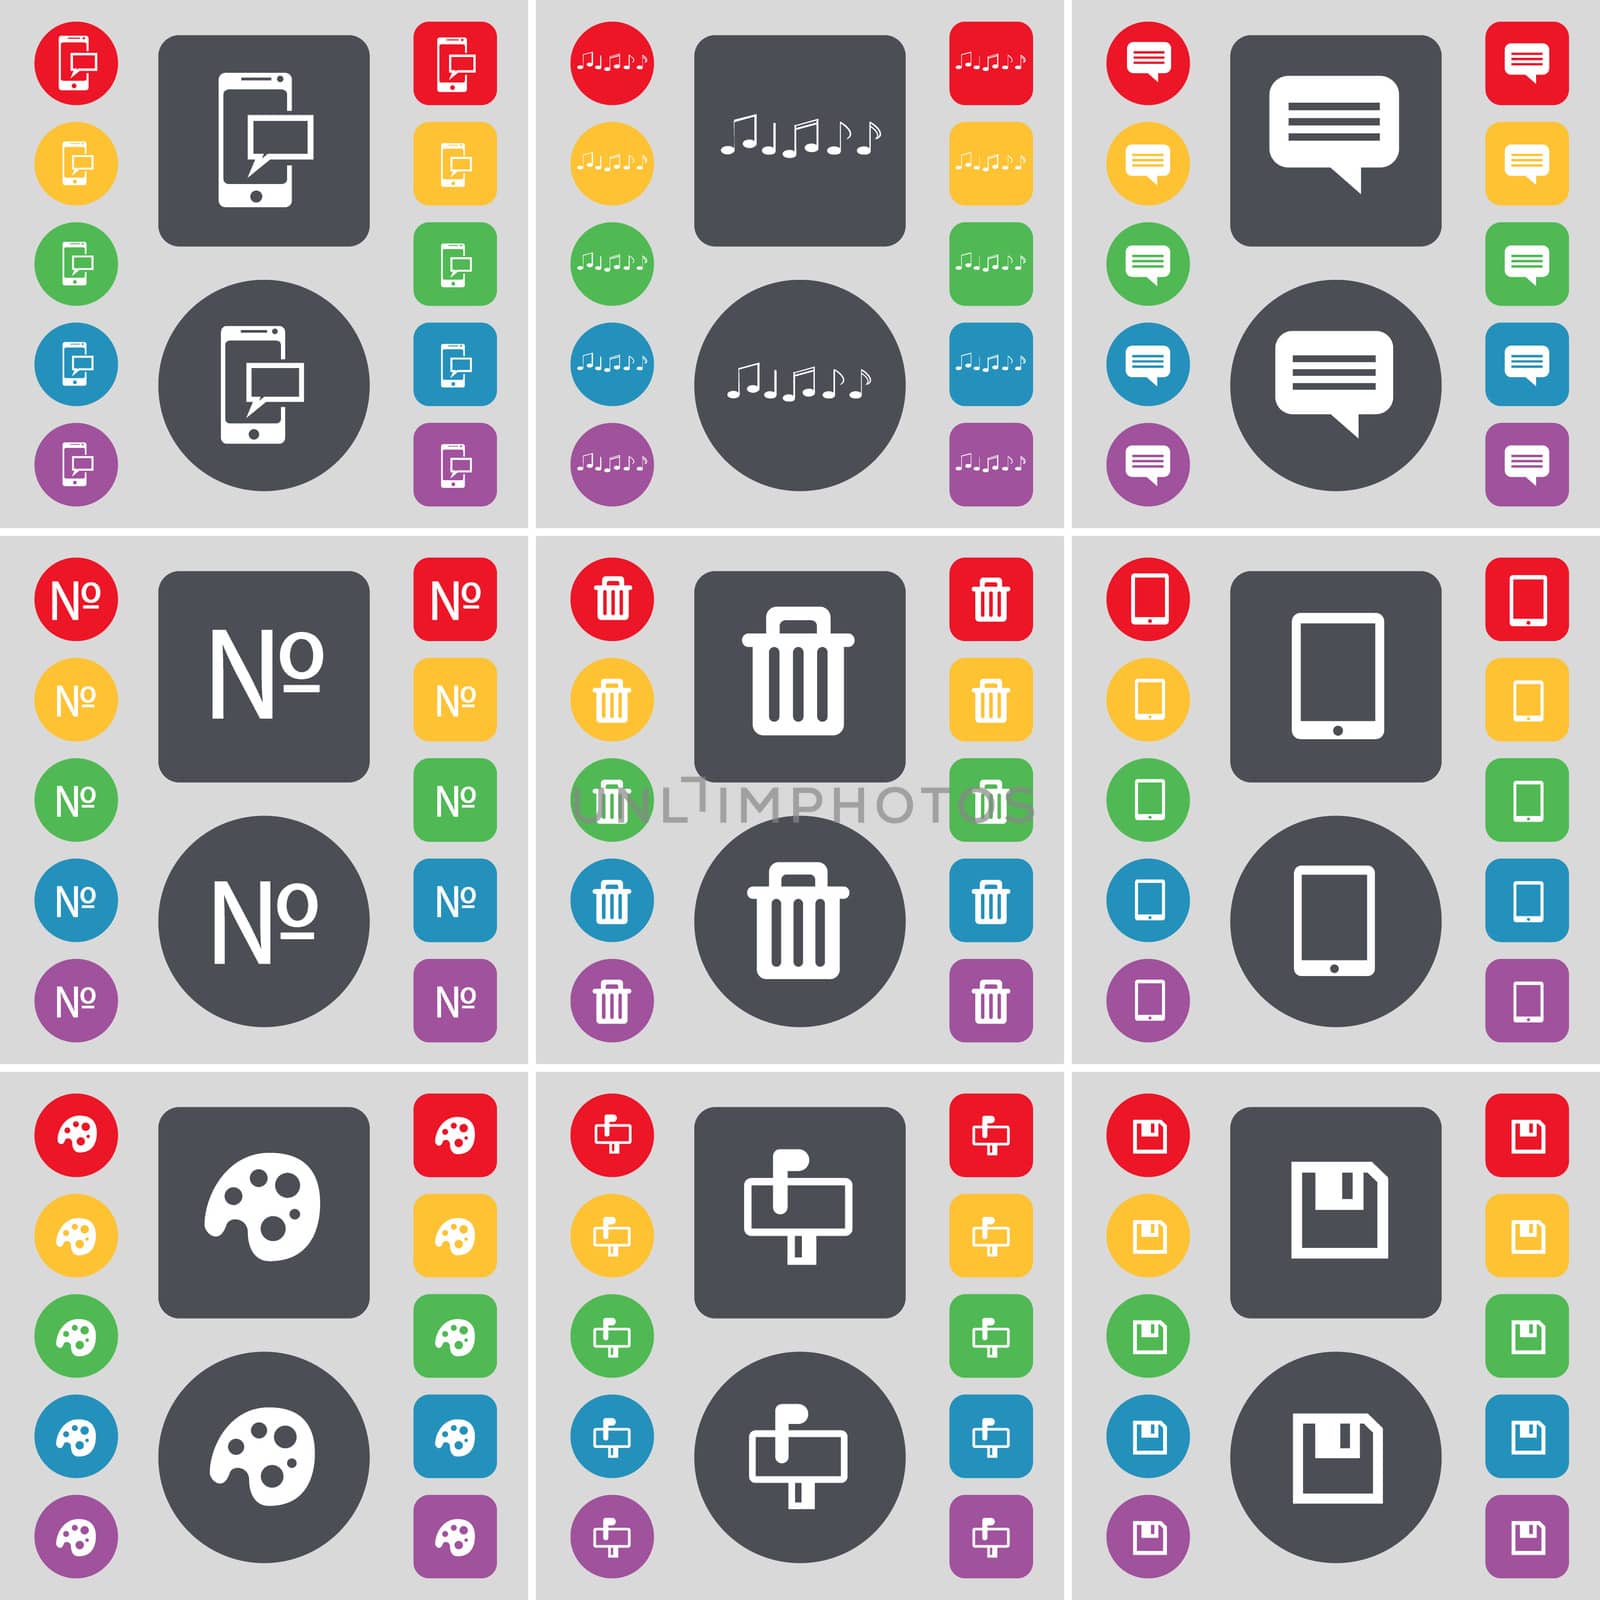 SMS, Note, Chat bubble, Number, Trash can, Tablet PC, Palette, Mailbox, Floppy icon symbol. A large set of flat, colored buttons for your design.  by serhii_lohvyniuk